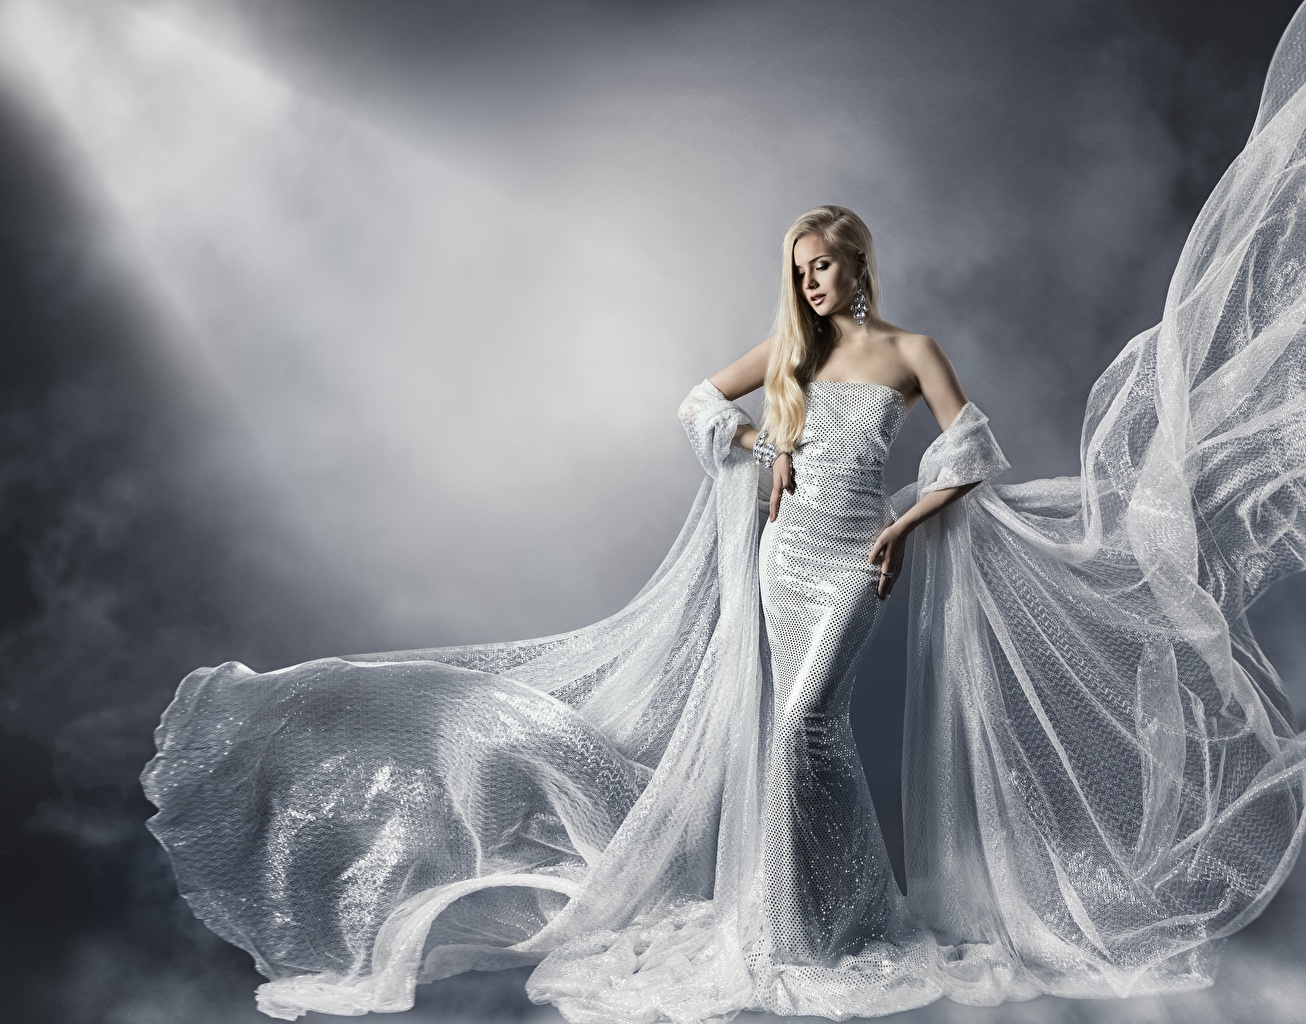 Wedding Gown Wallpapers - Wallpaper Cave